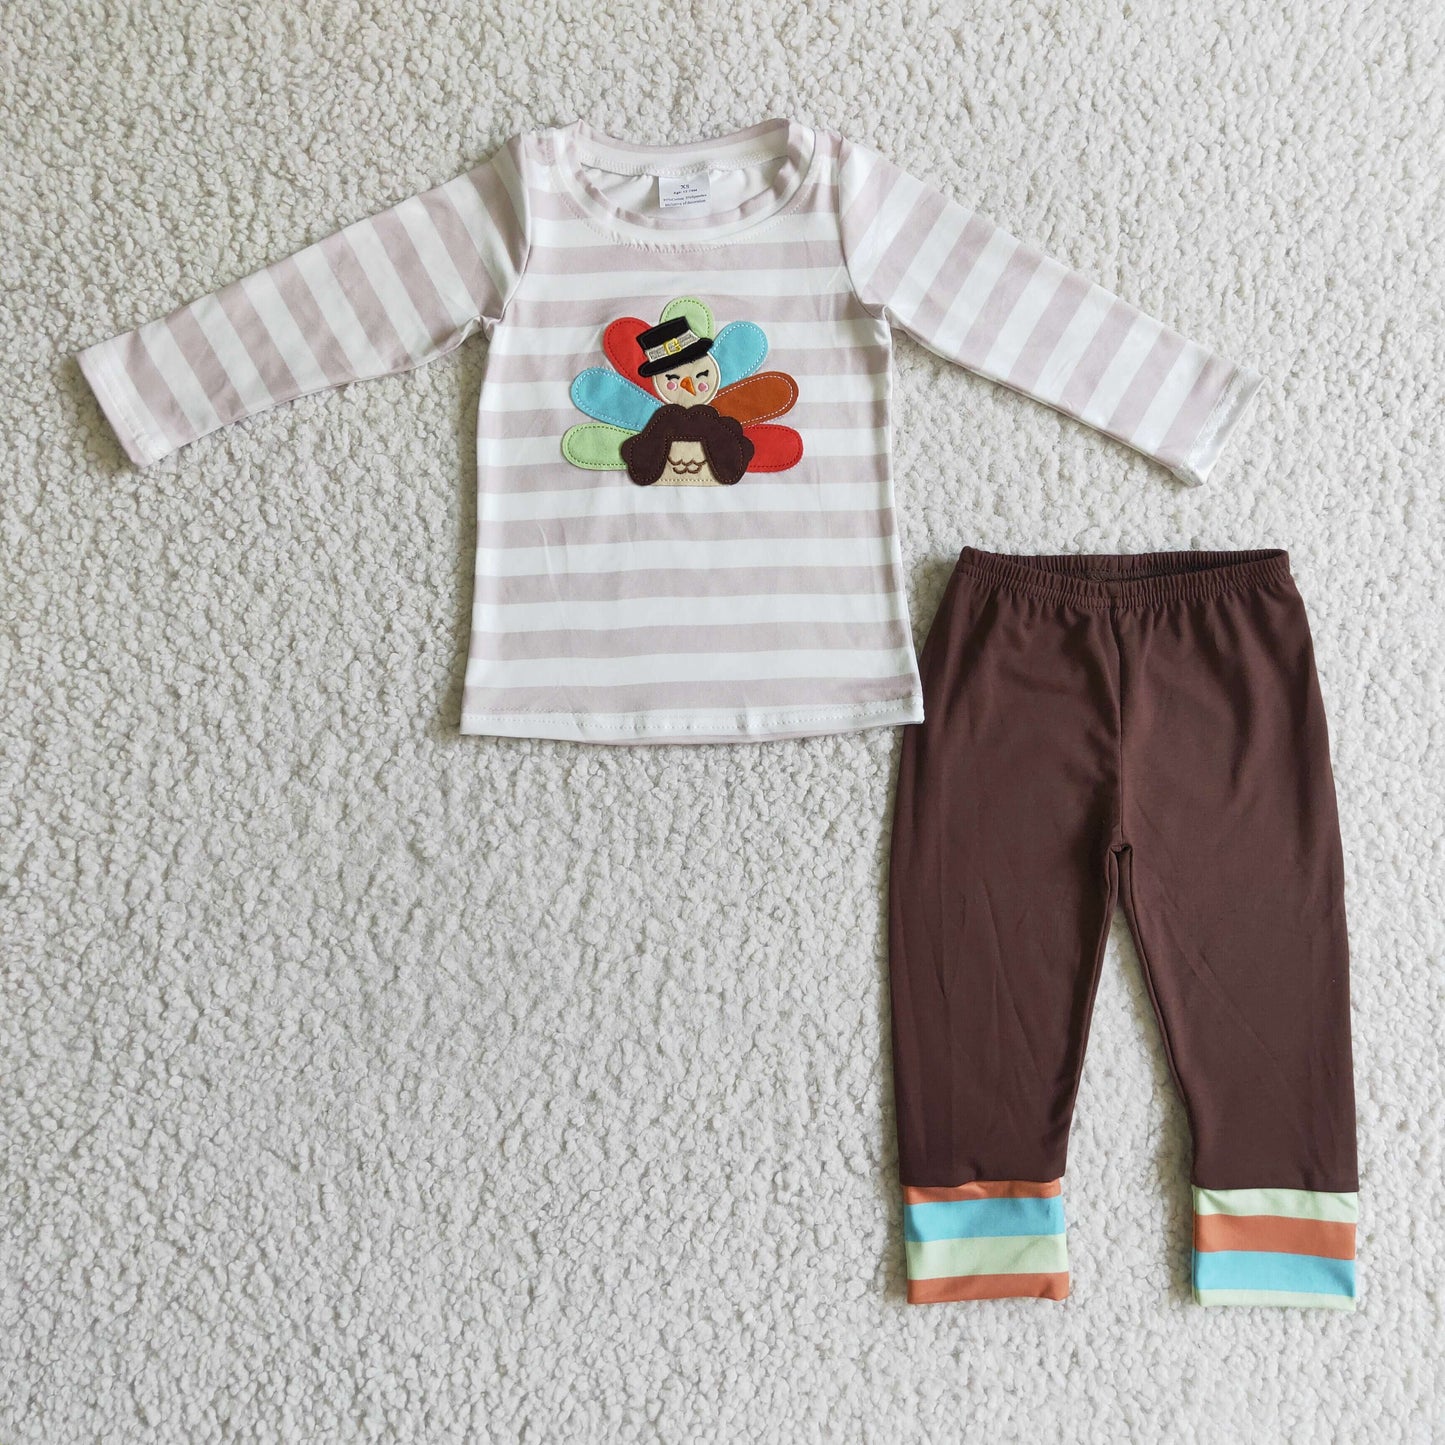 BLP0081 boy thanksgiving day cotton long sleeve stripe top with turkey embroidery match brown elastic waist pants